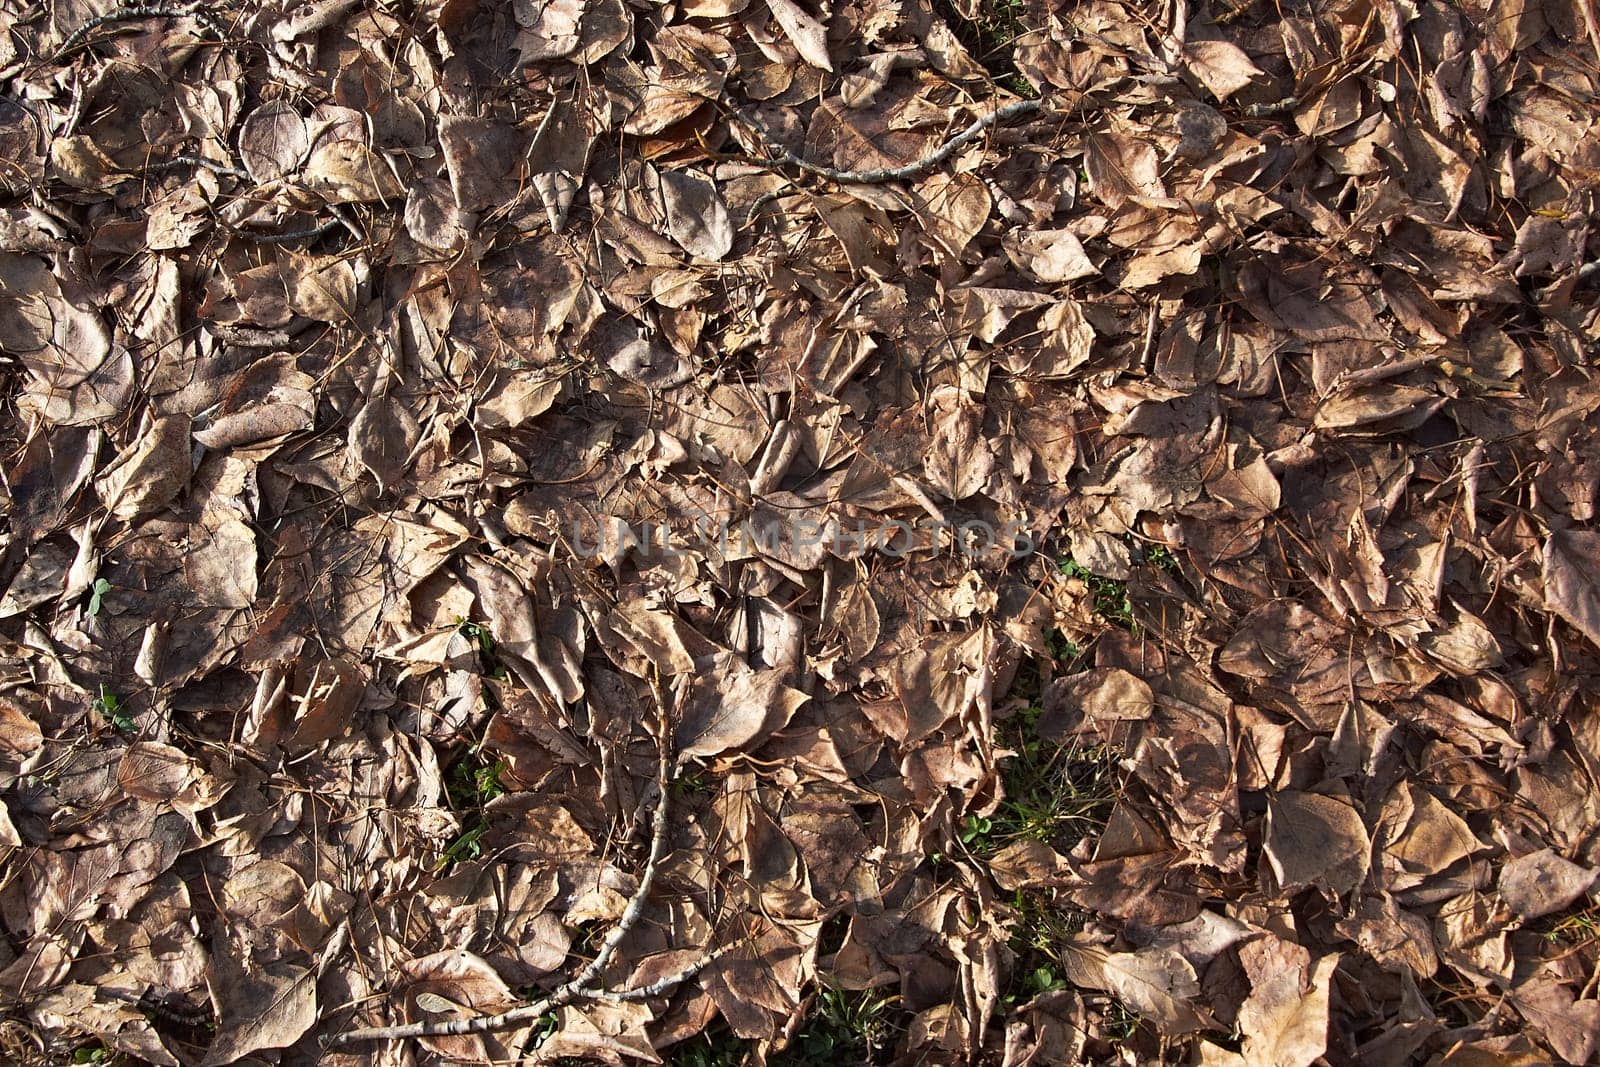 Fallen leaves cover the ground in Siberia there are many leaves as a background